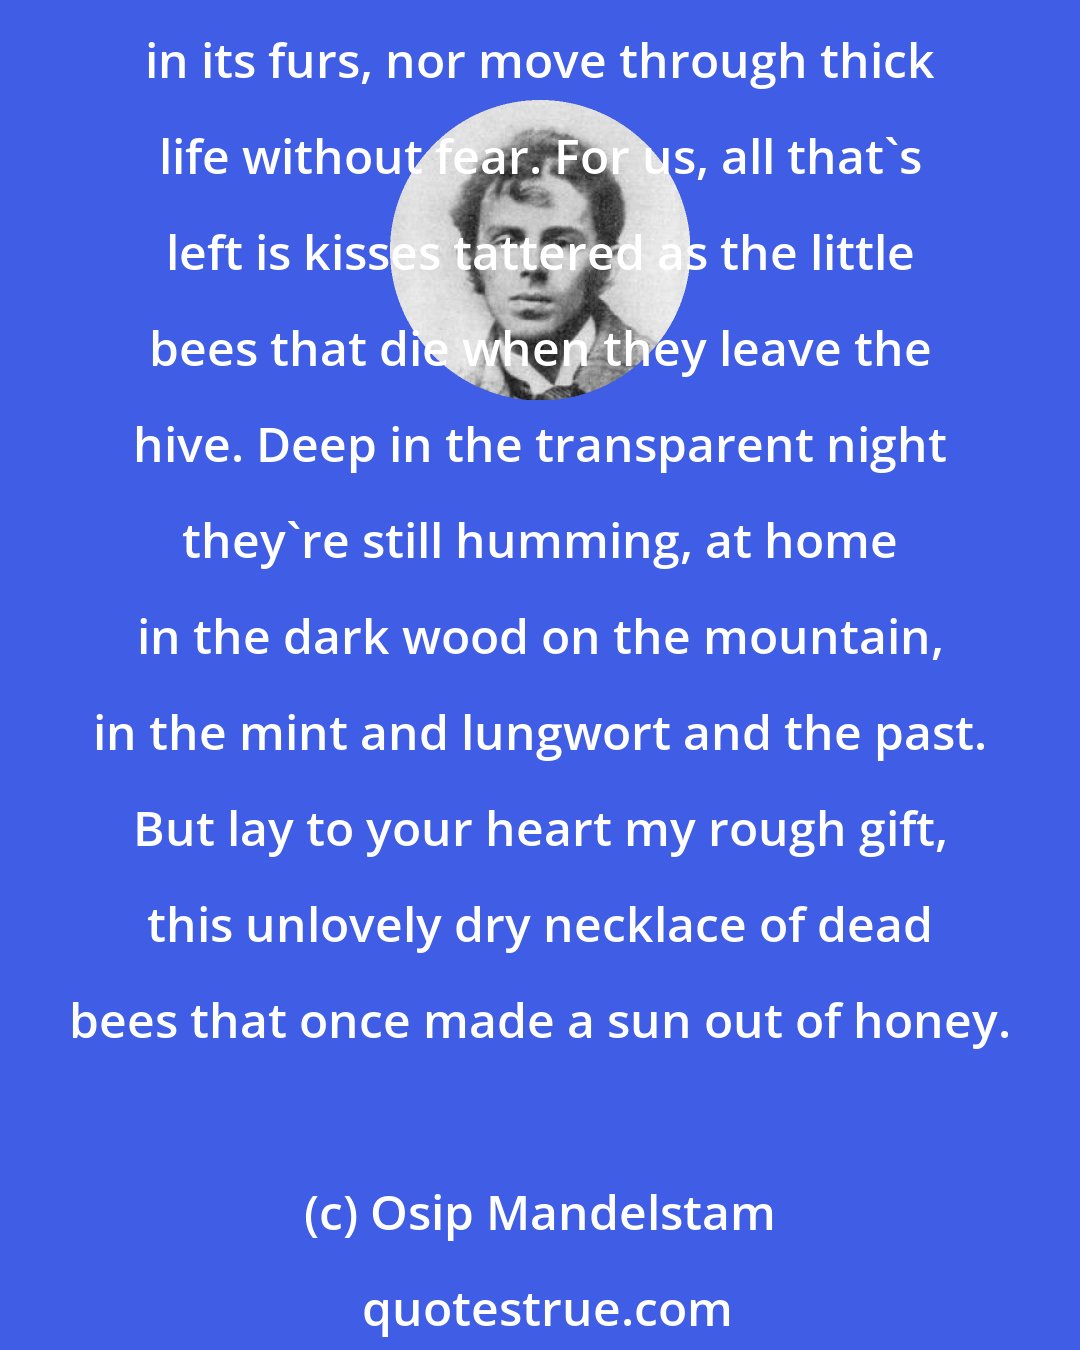 Osip Mandelstam: Take from my palms, to soothe your heart, a little honey, a little sun, in obedience to Persephone's bees. You can't untie a boat that was never moored, nor hear a shadow in its furs, nor move through thick life without fear. For us, all that's left is kisses tattered as the little bees that die when they leave the hive. Deep in the transparent night they're still humming, at home in the dark wood on the mountain, in the mint and lungwort and the past. But lay to your heart my rough gift, this unlovely dry necklace of dead bees that once made a sun out of honey.